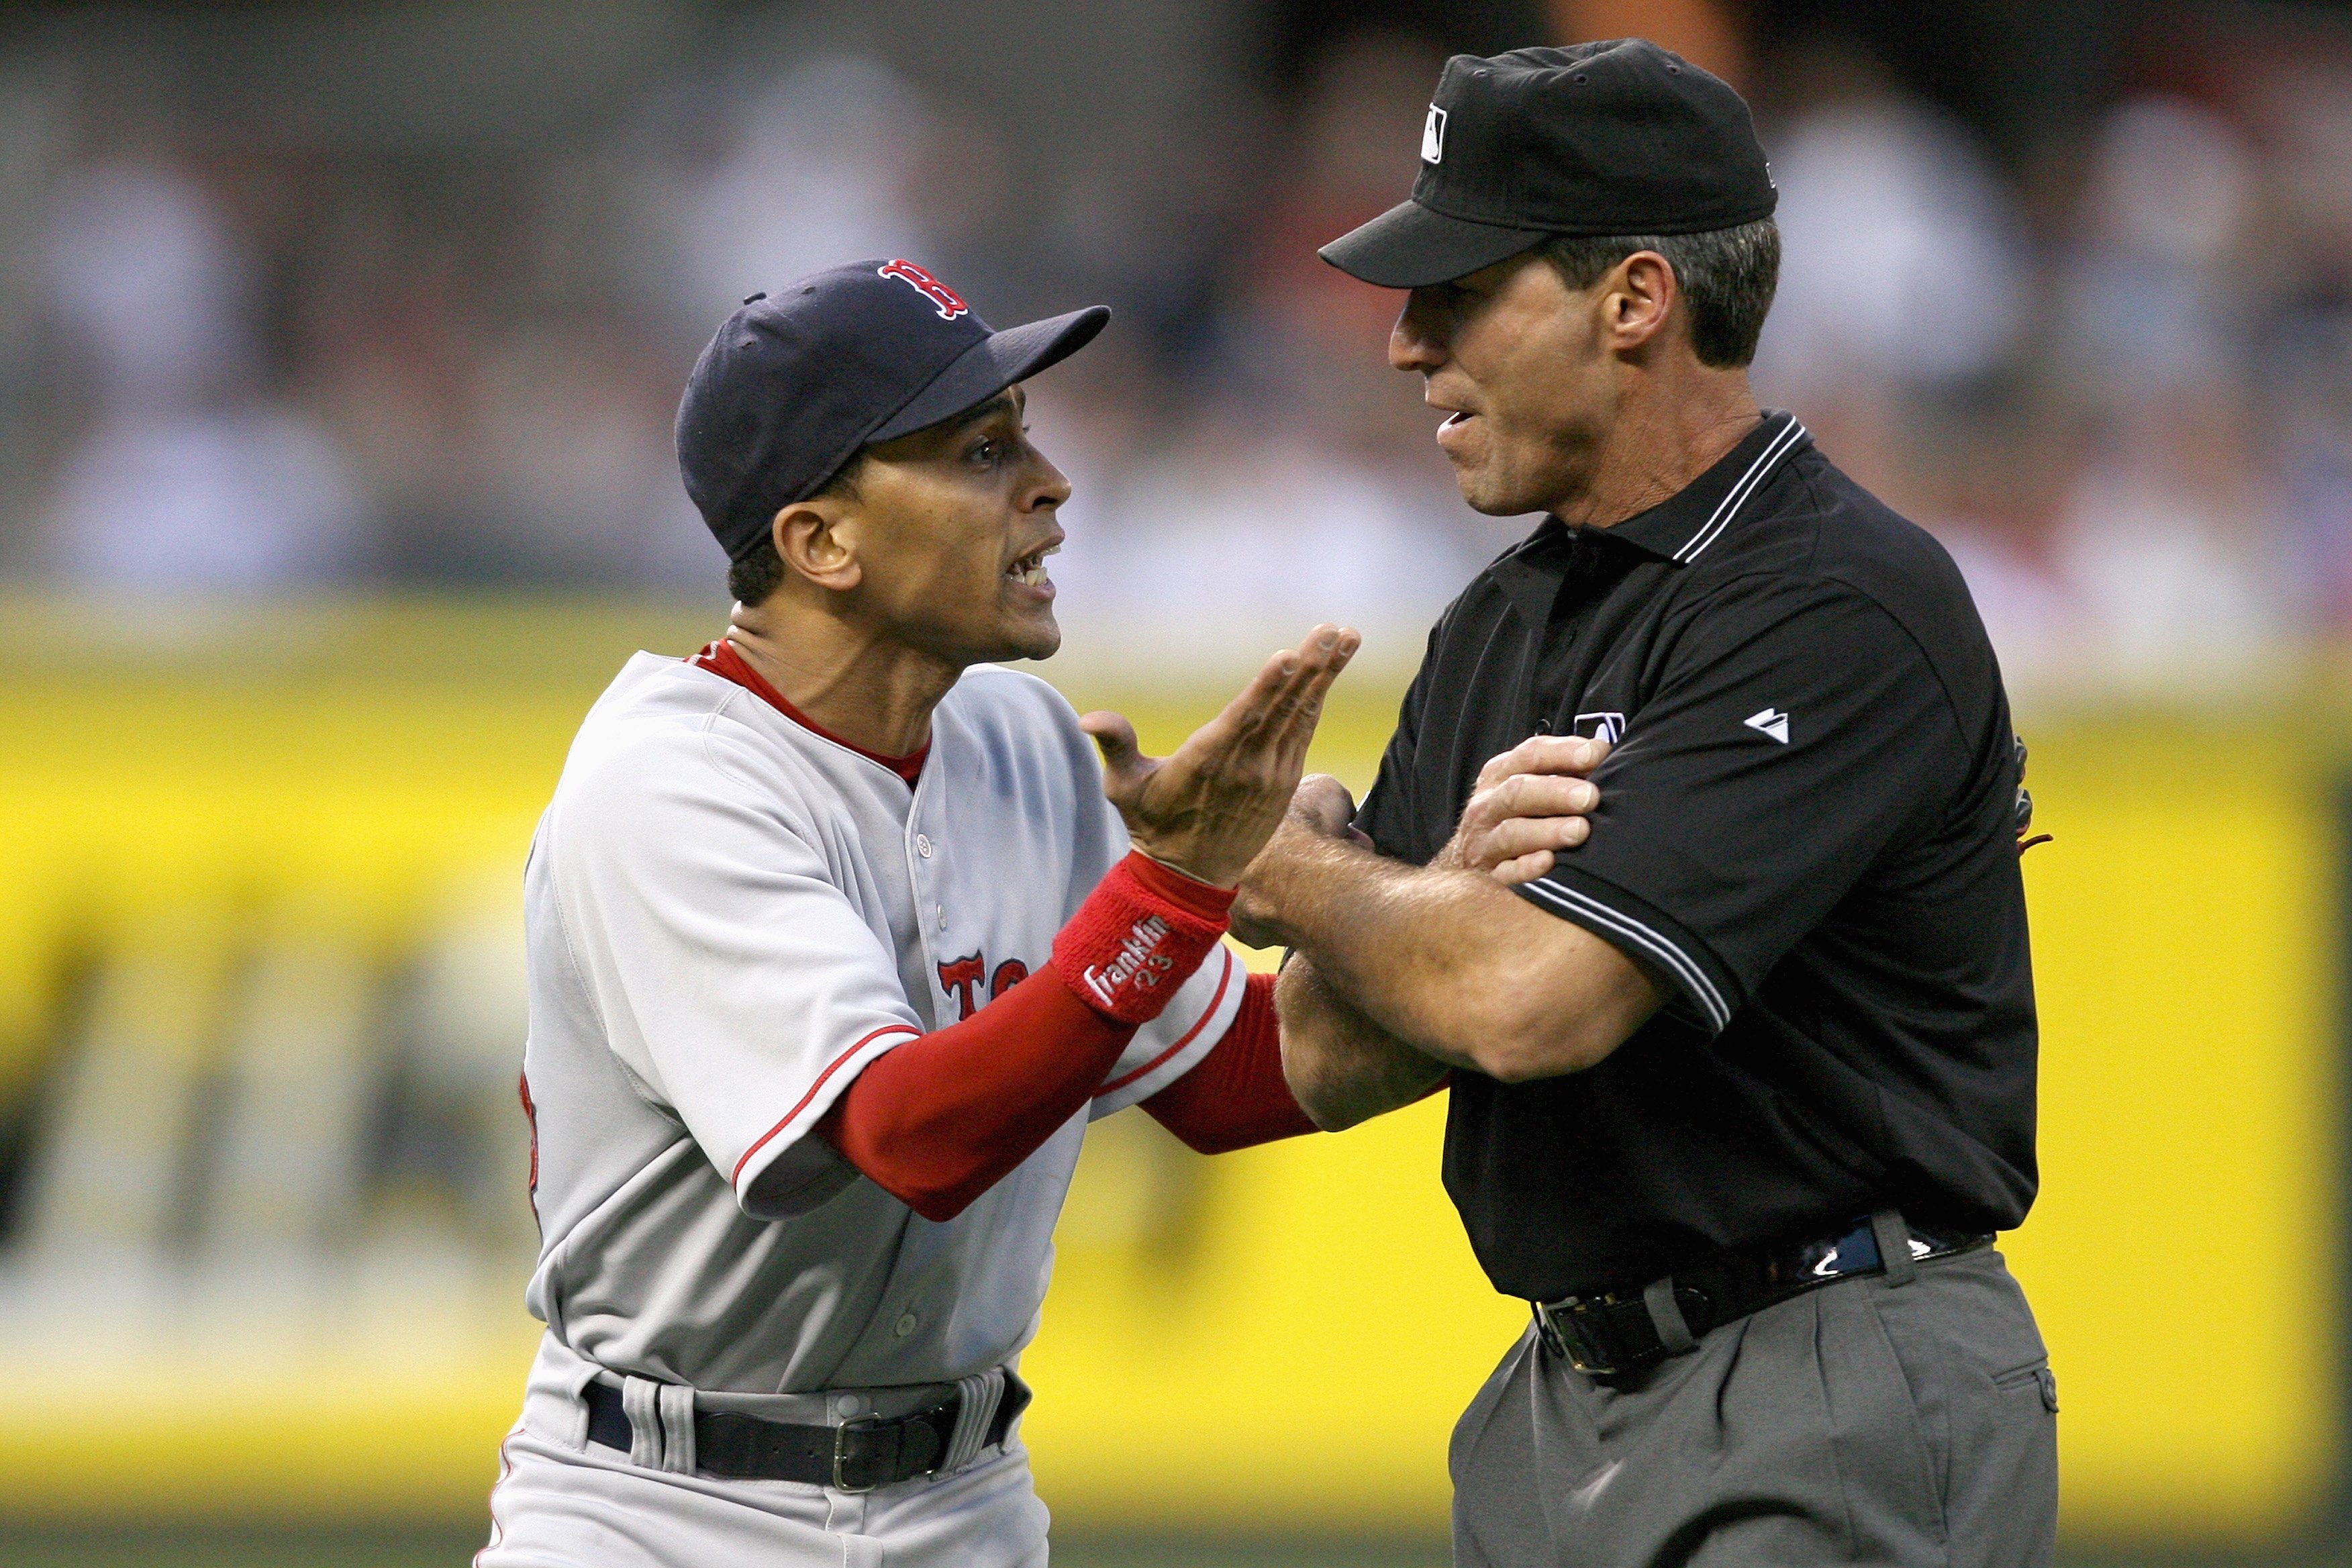 Ten Worst Umpires In MLB Based On Consistency And Accuracy